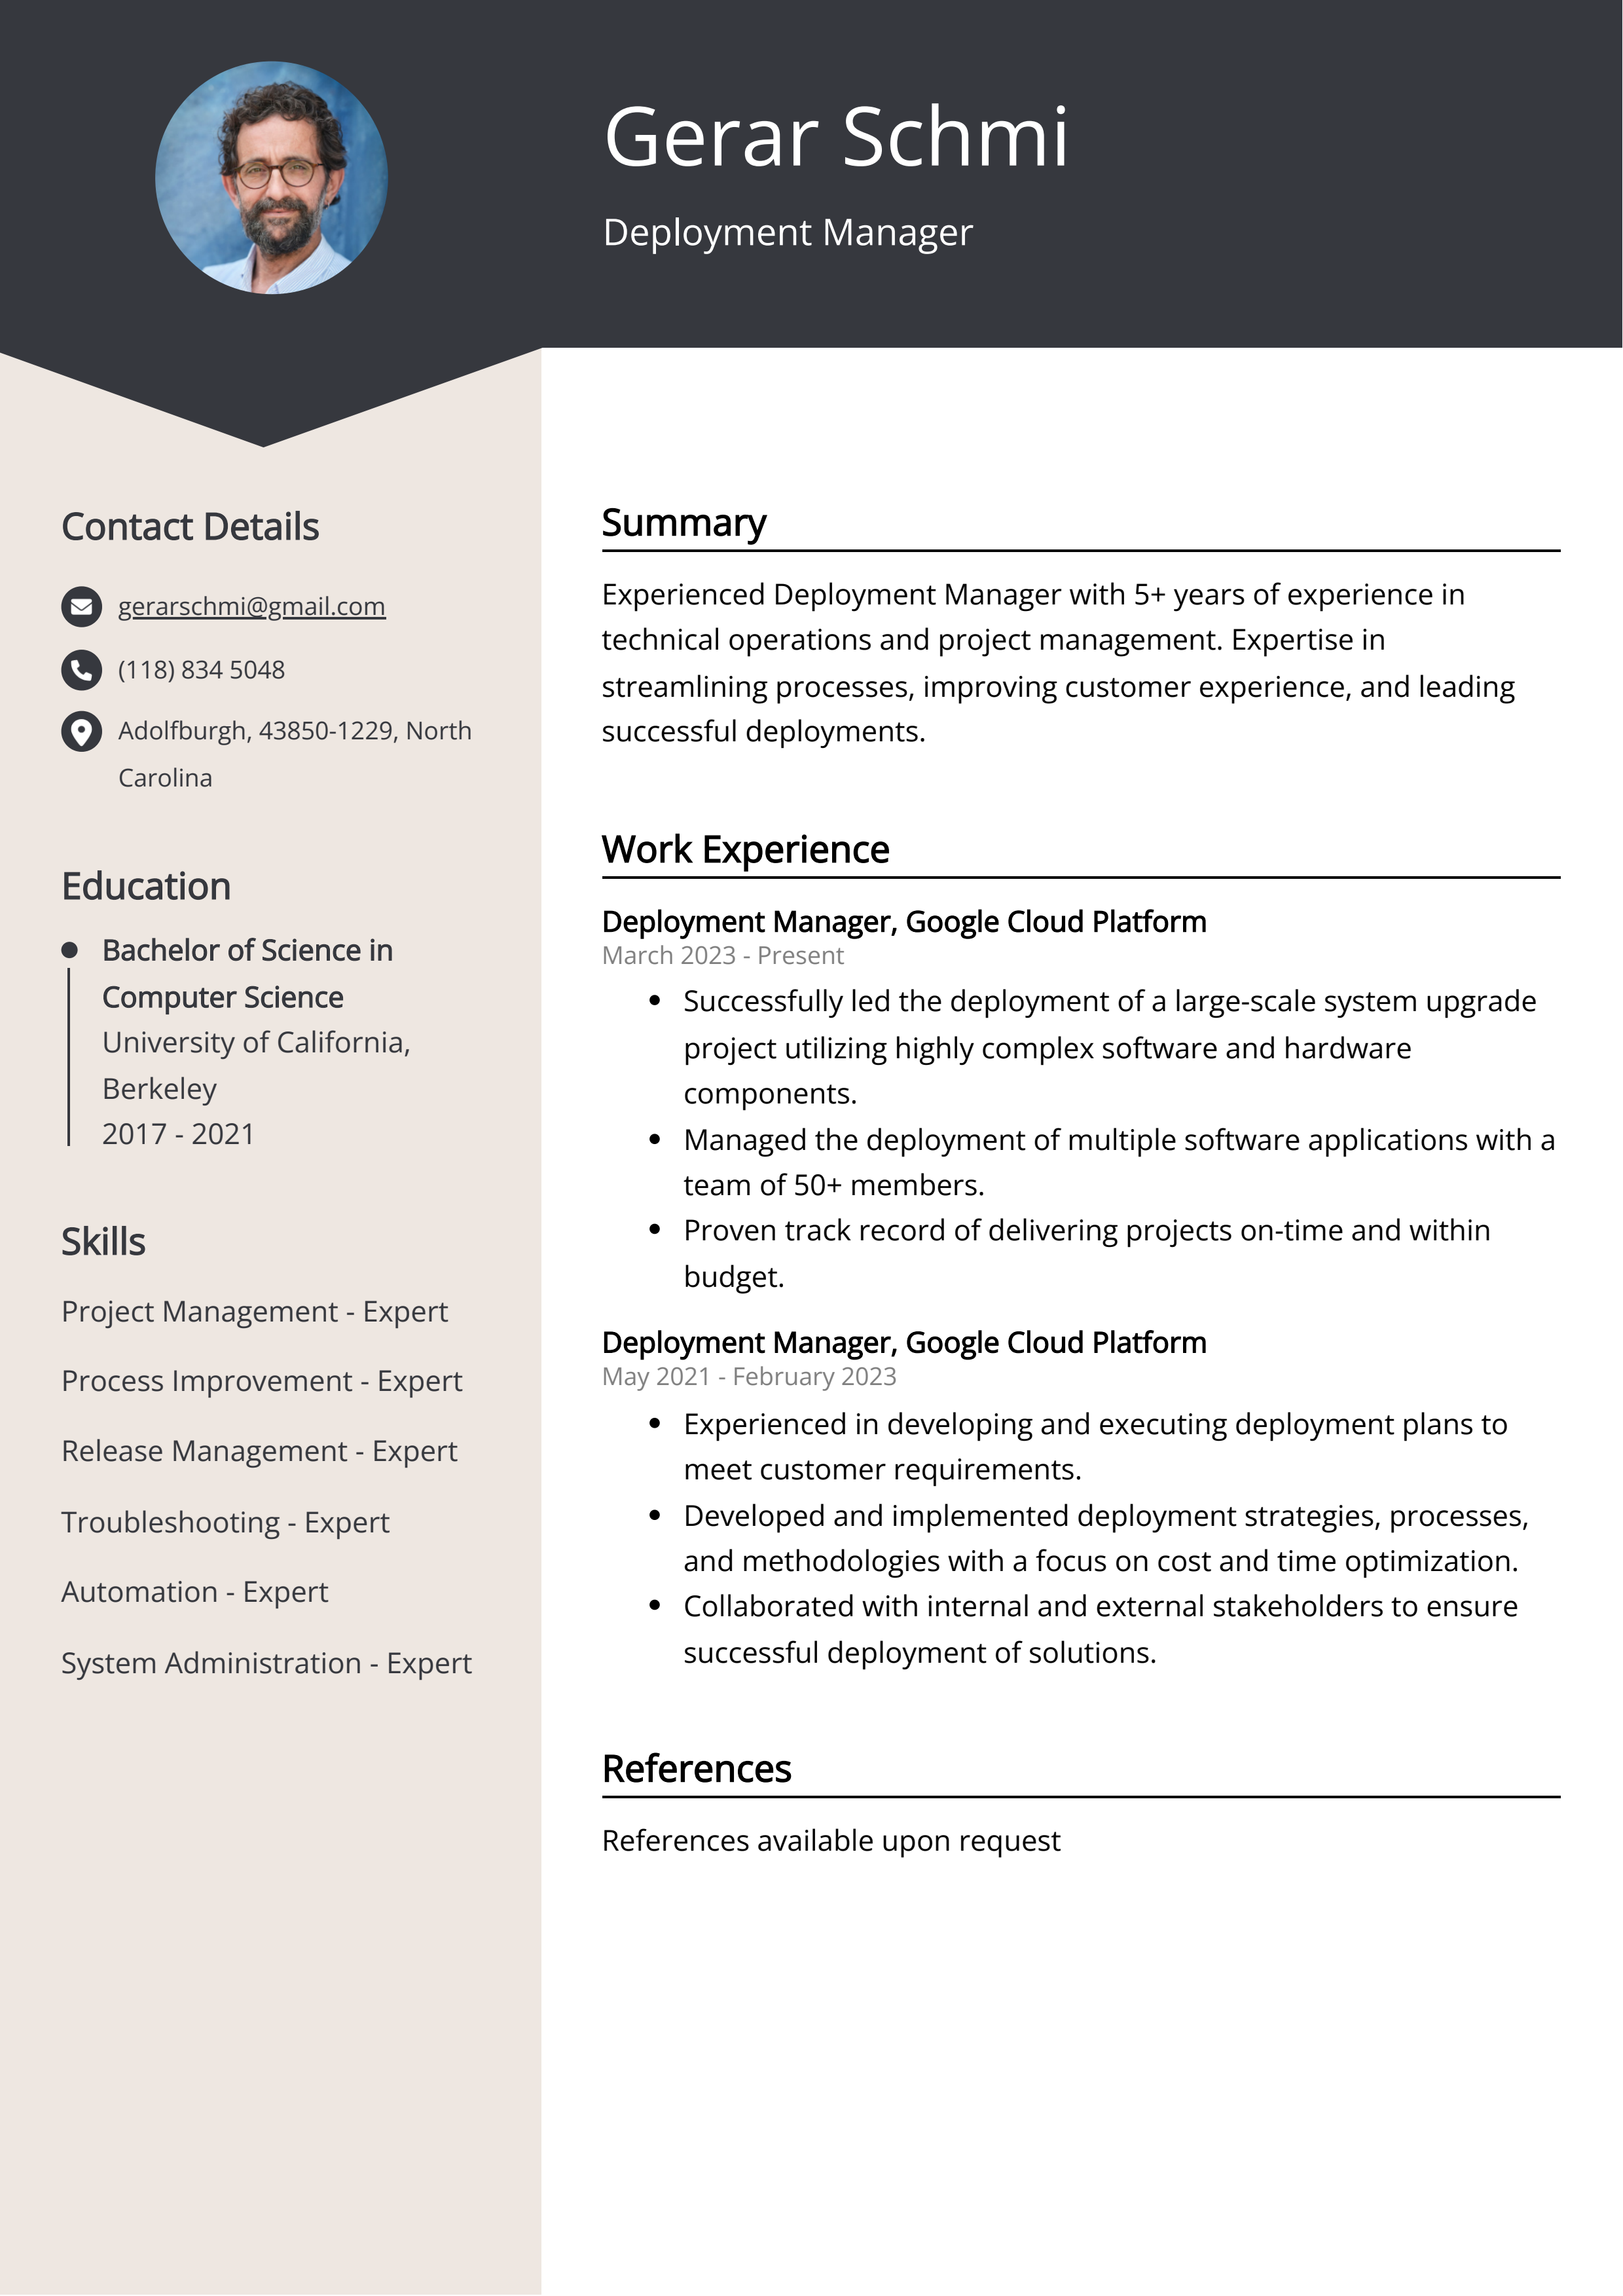 Deployment Manager Resume Example